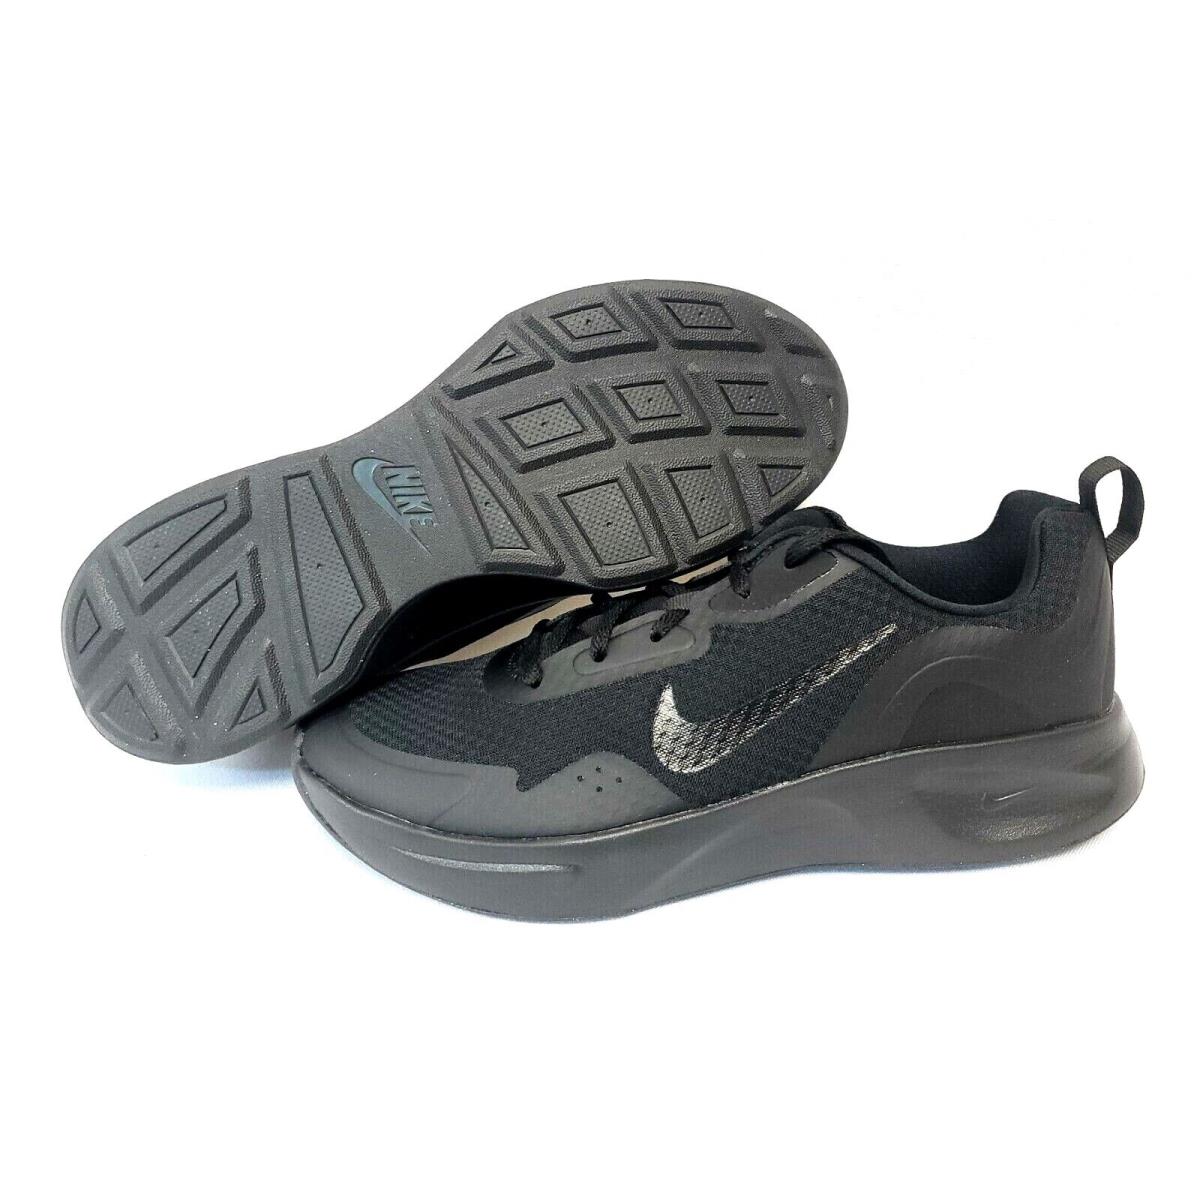 Mens Nike Wearallday CJ1682 003 Black Athletic Sneakers Shoes